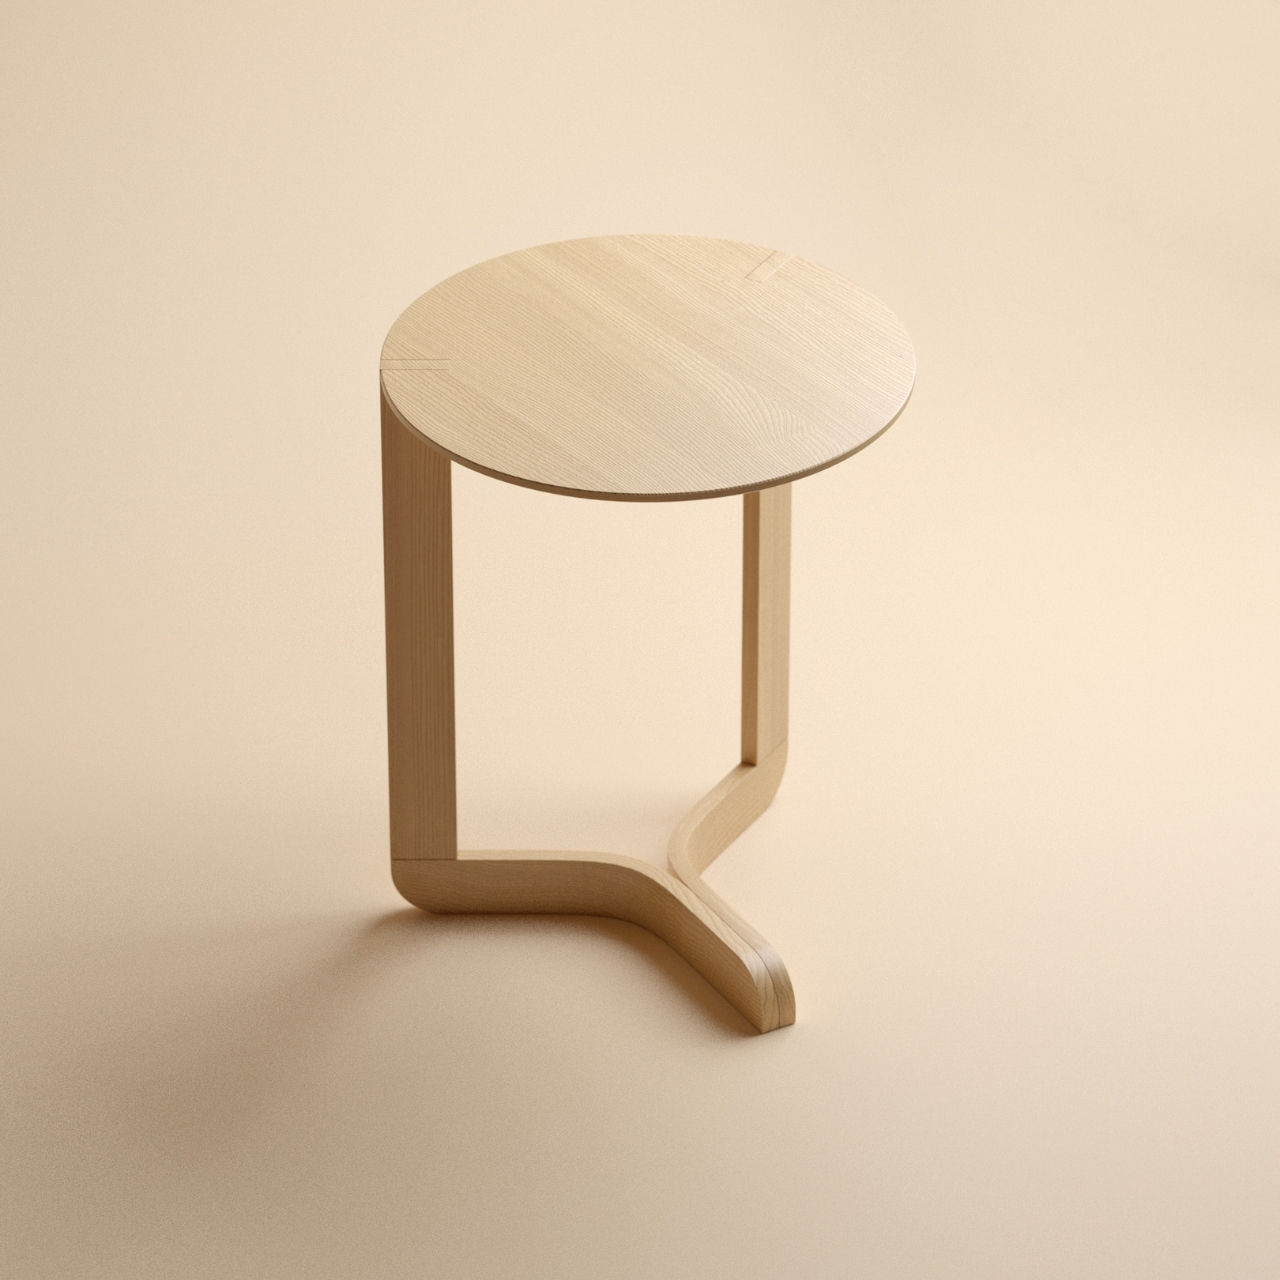 #Praying Mantis side table is minimalist furniture with legs and “arms”